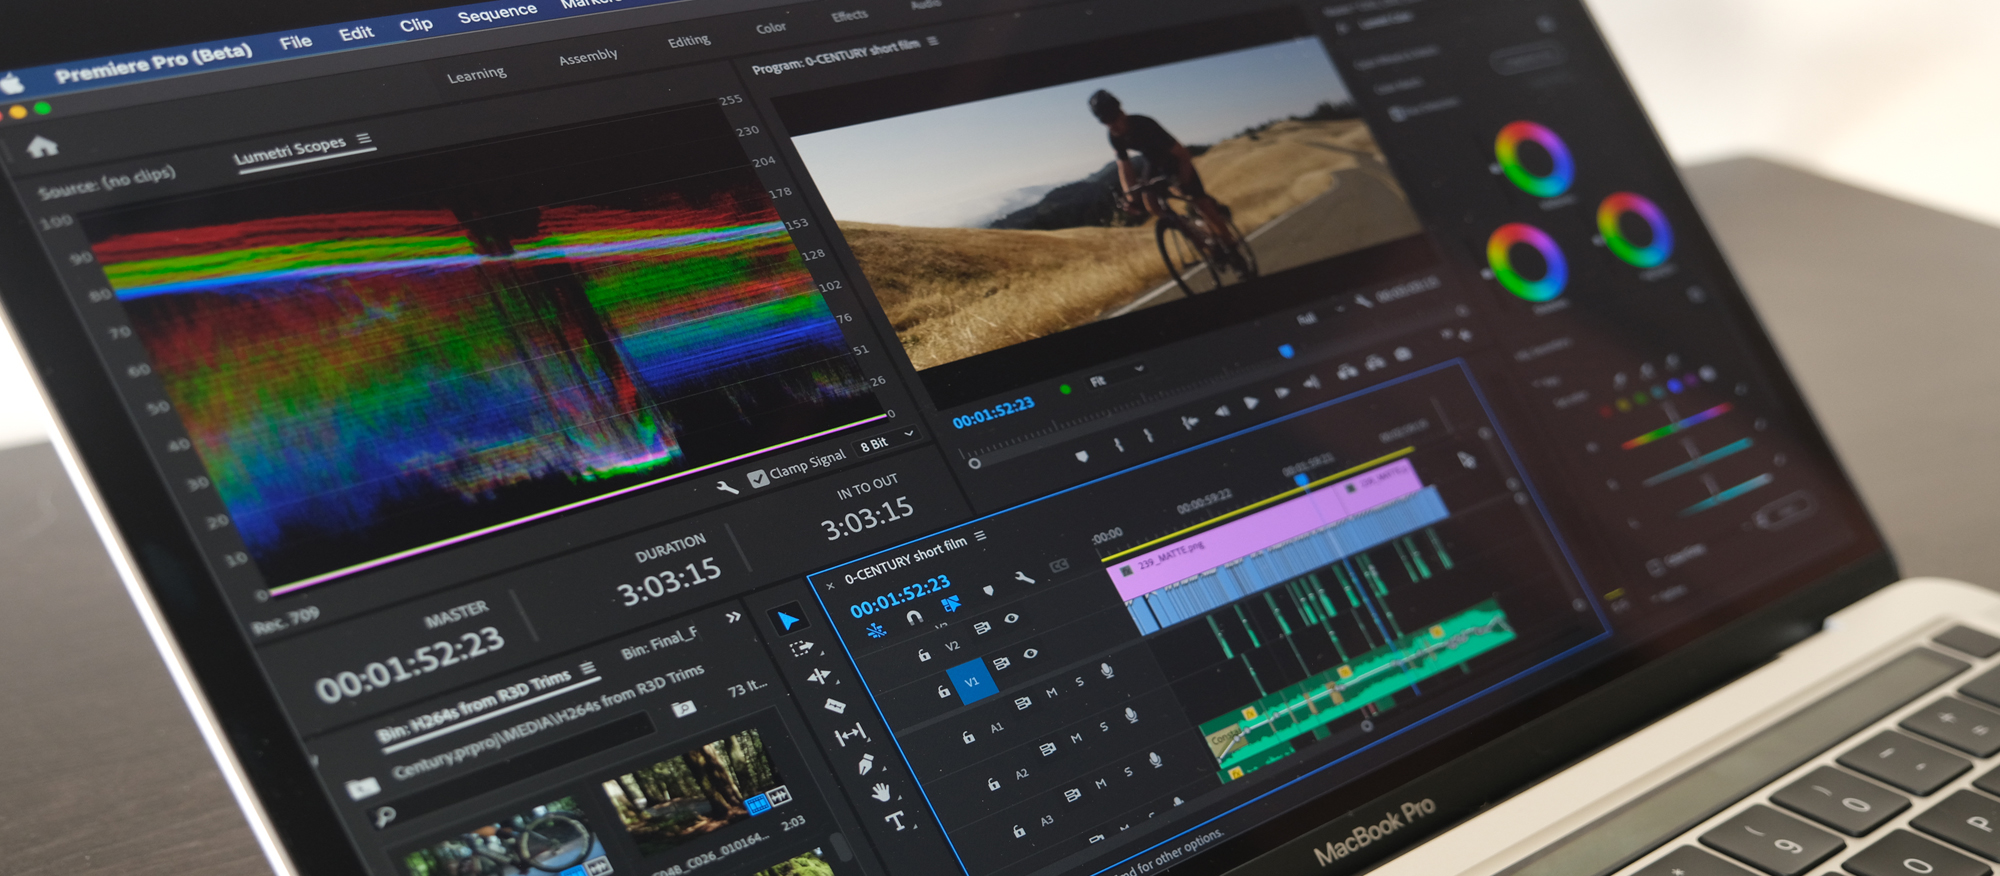 adobe premiere basic requirements for adobe on mac